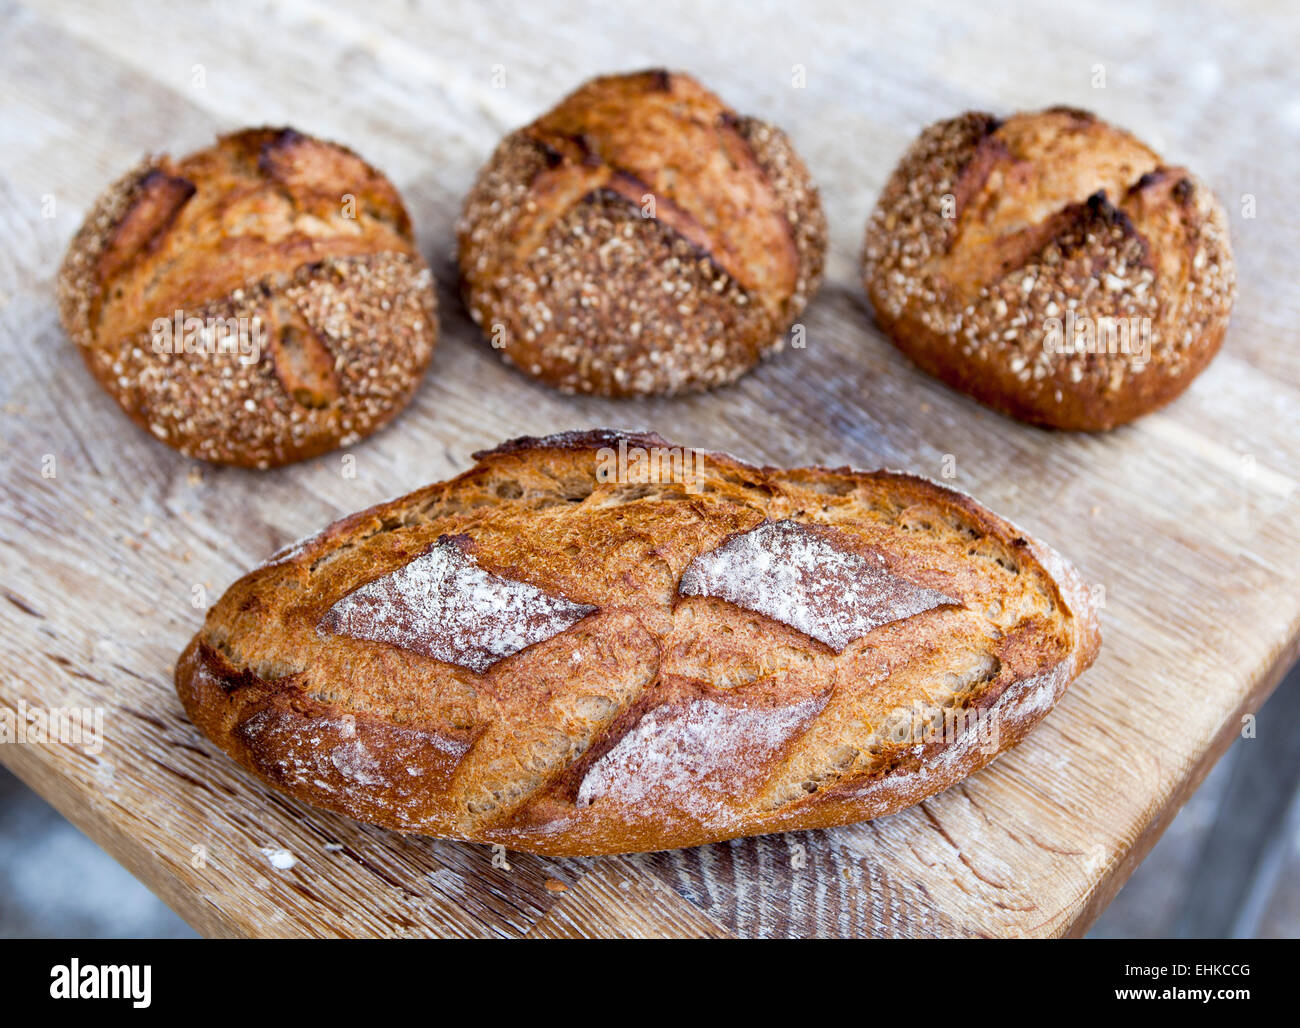 Loaves of freshly baked wholemeal bread Stock Photo